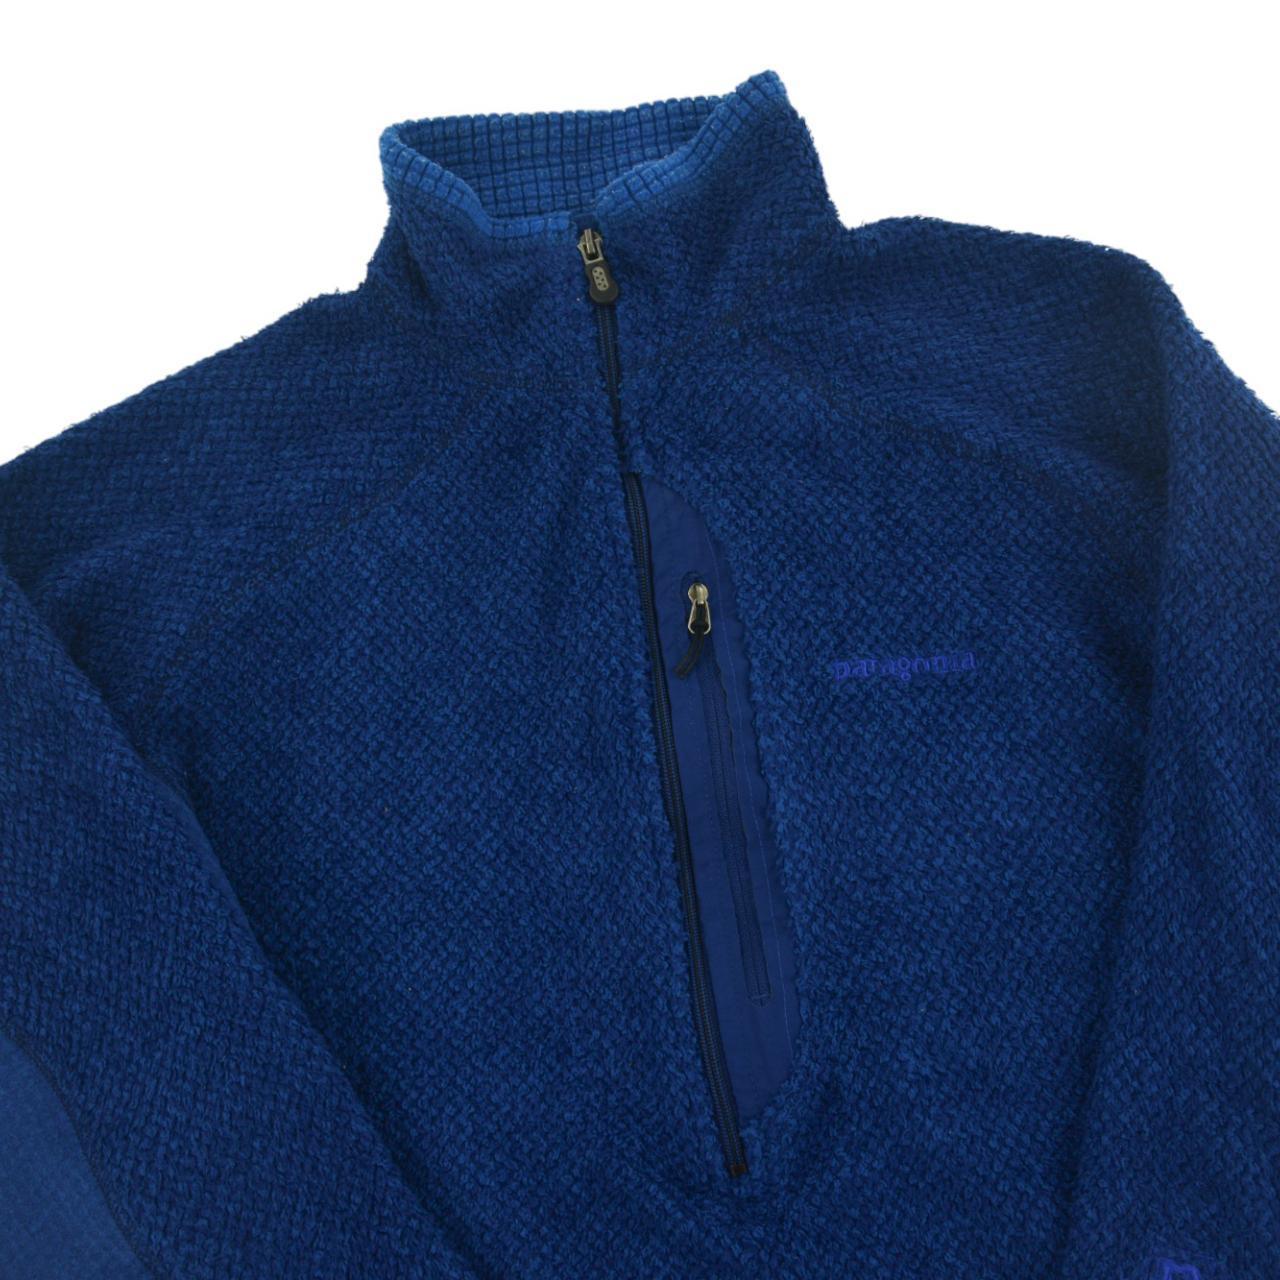 Vintage Patagonia Fleece Size S - Known Source